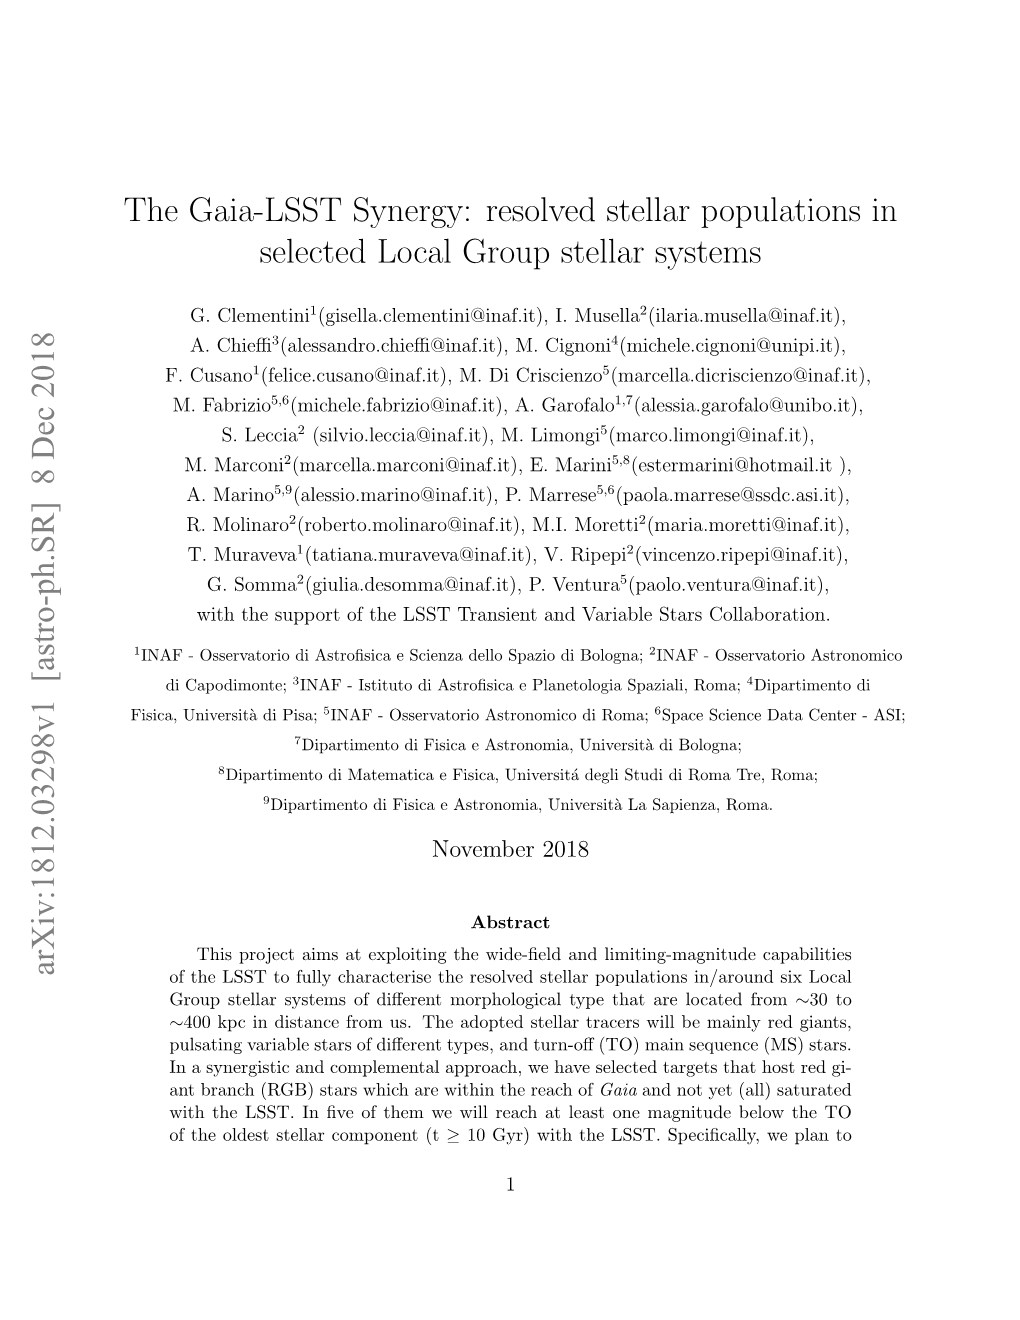 The Gaia-LSST Synergy: Resolved Stellar Populations in Selected Local Group Stellar Systems